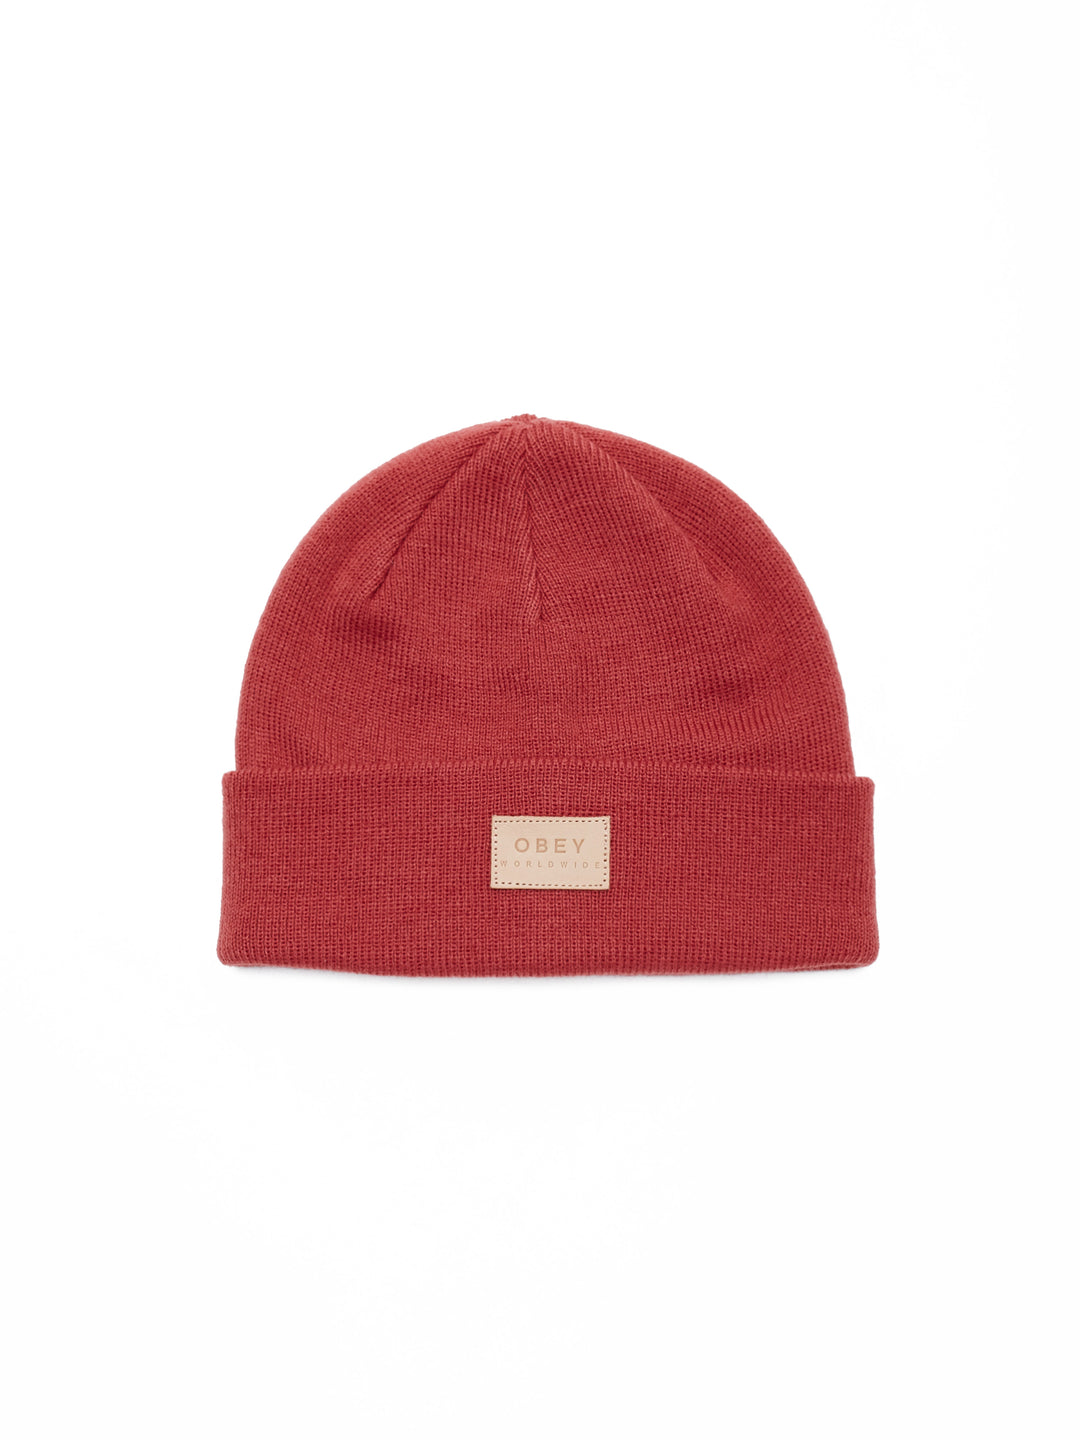 Briean Beanie | Mineral Red - West of Camden - Main Image Number 1 of 2